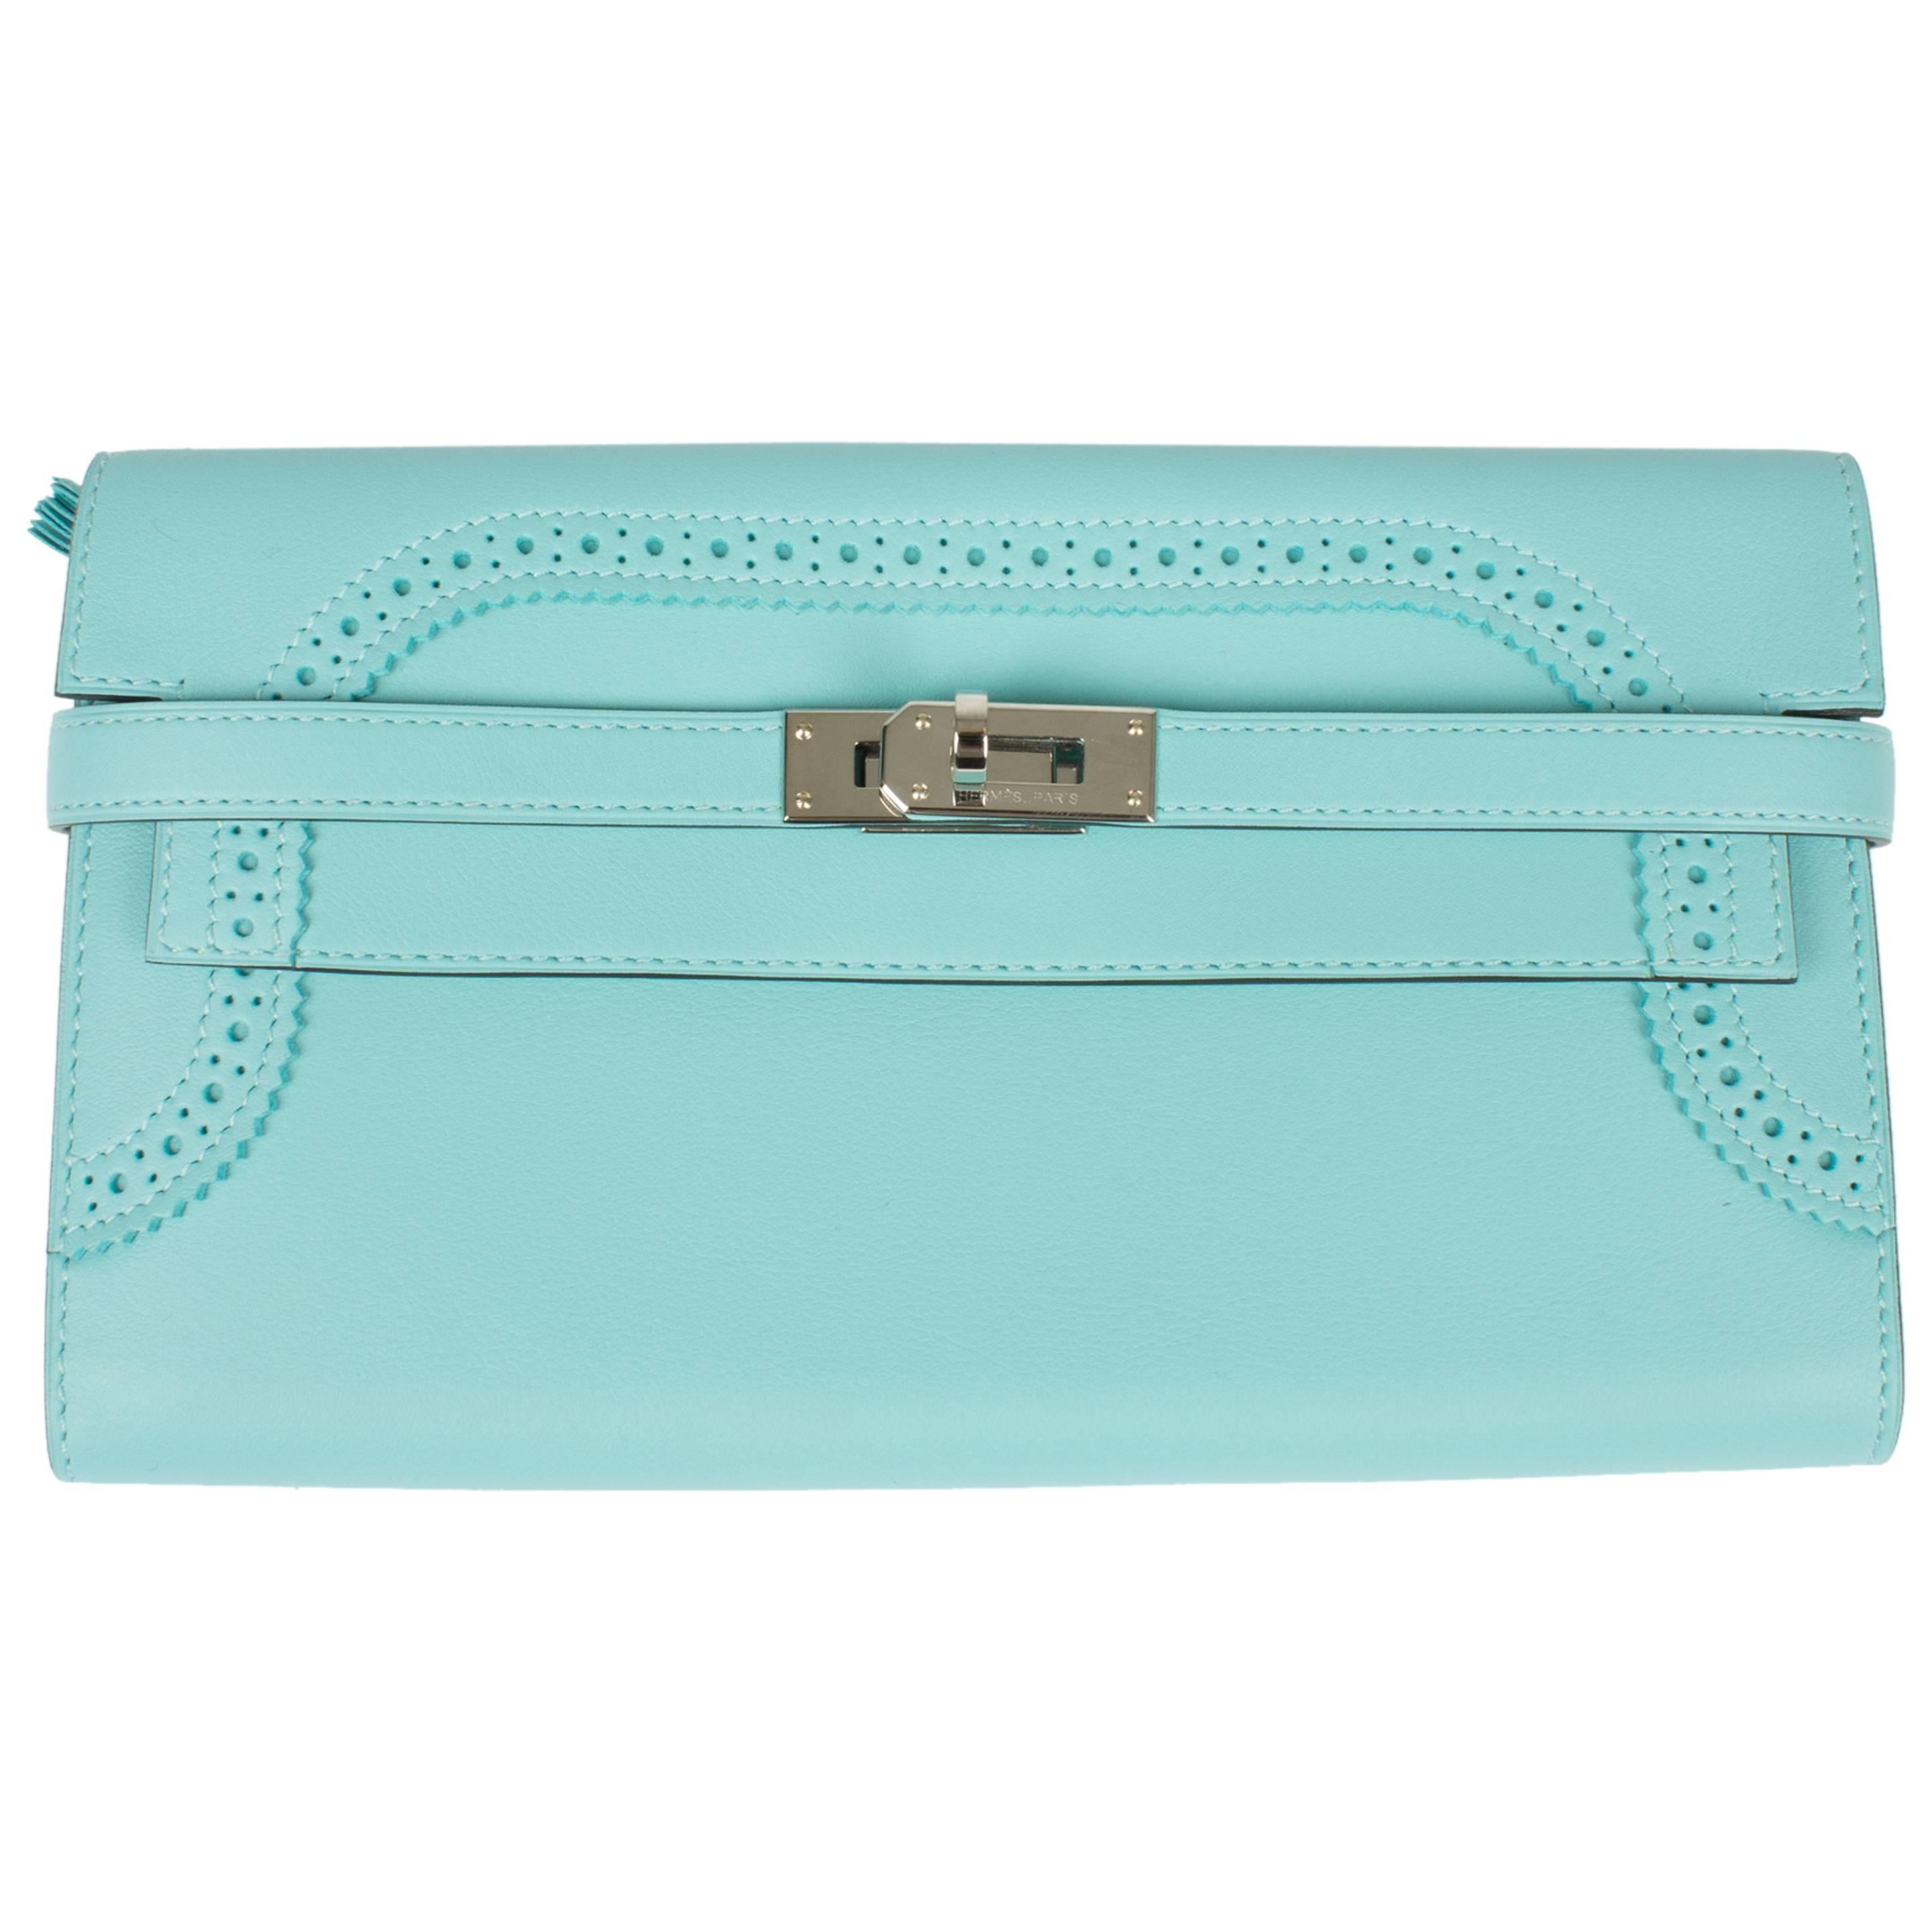 Hermes Kelly Wallet Classic Ghillies Veau Swift Blue Atoll Clutch - limited edit